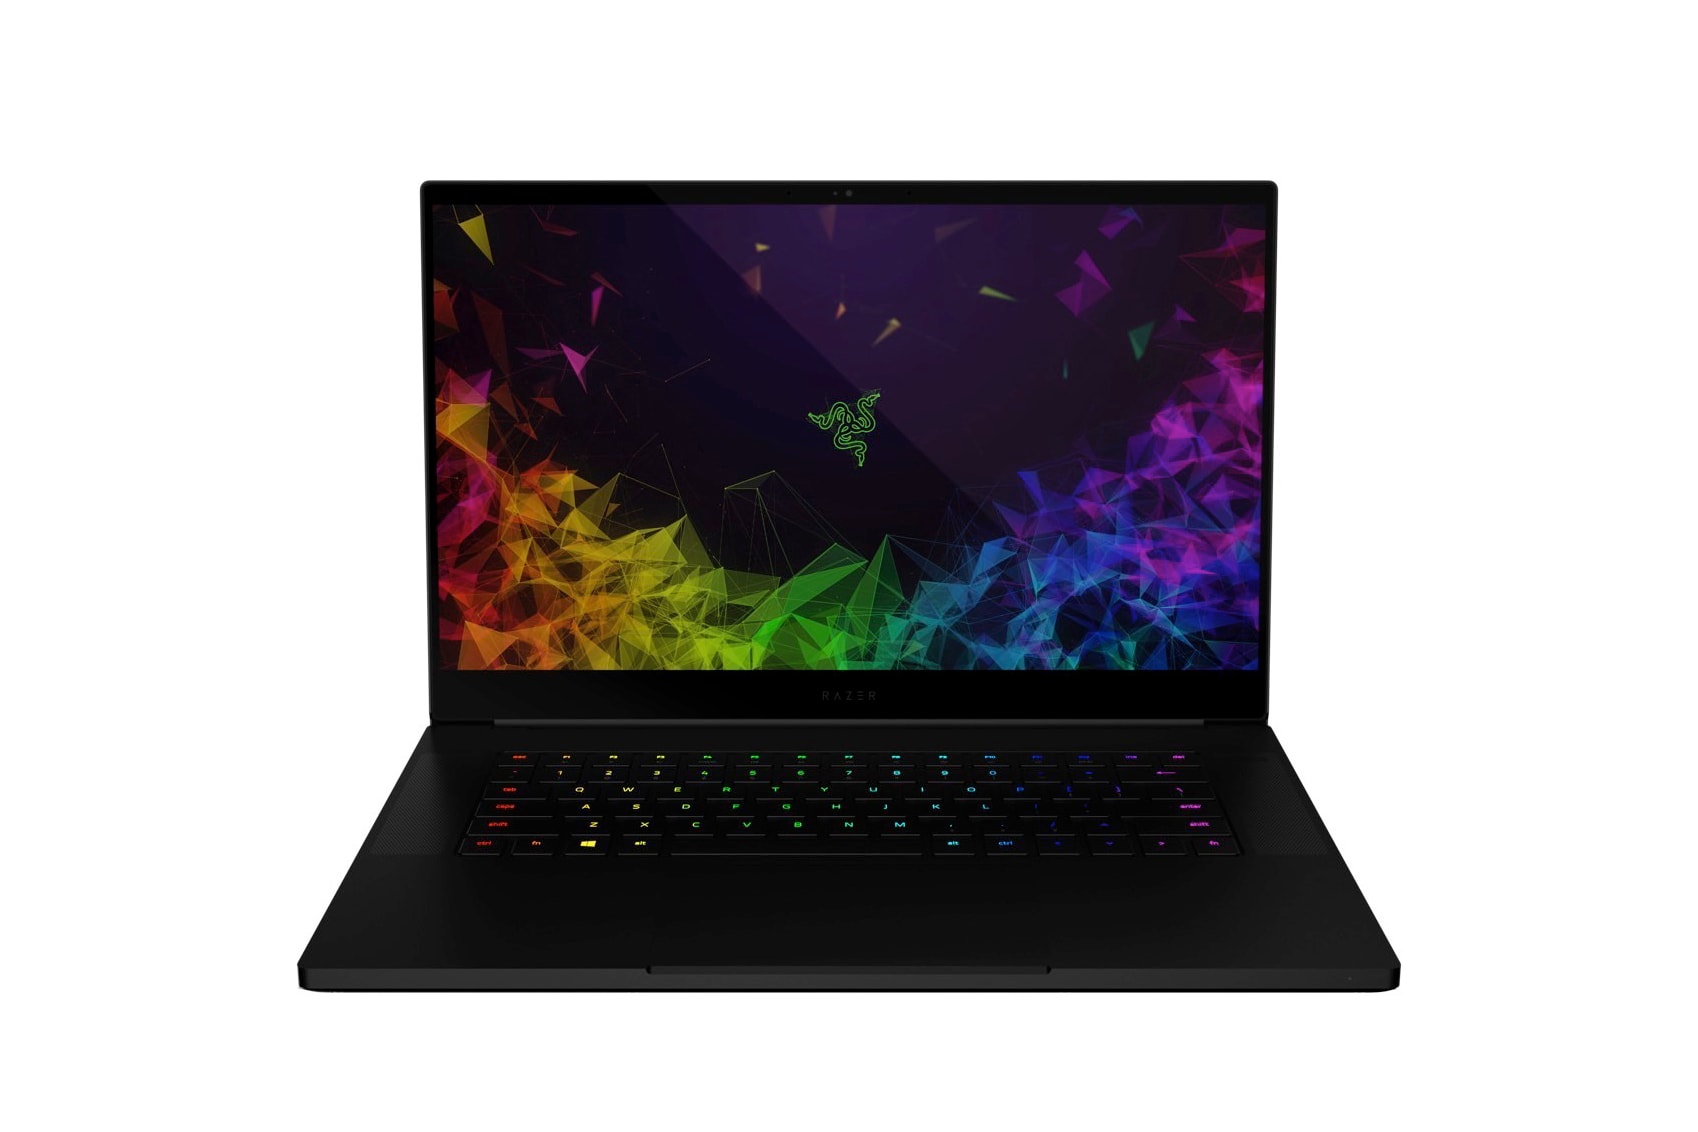 Razer Blade 2018 Gaming Laptop Fortnite Battle Royale 15.6 Inch Screen 4.9mm Thin Bezels 144hz Full HD Refresh Rate 100% sRGB Adobe RGB Support 4K Touch Display